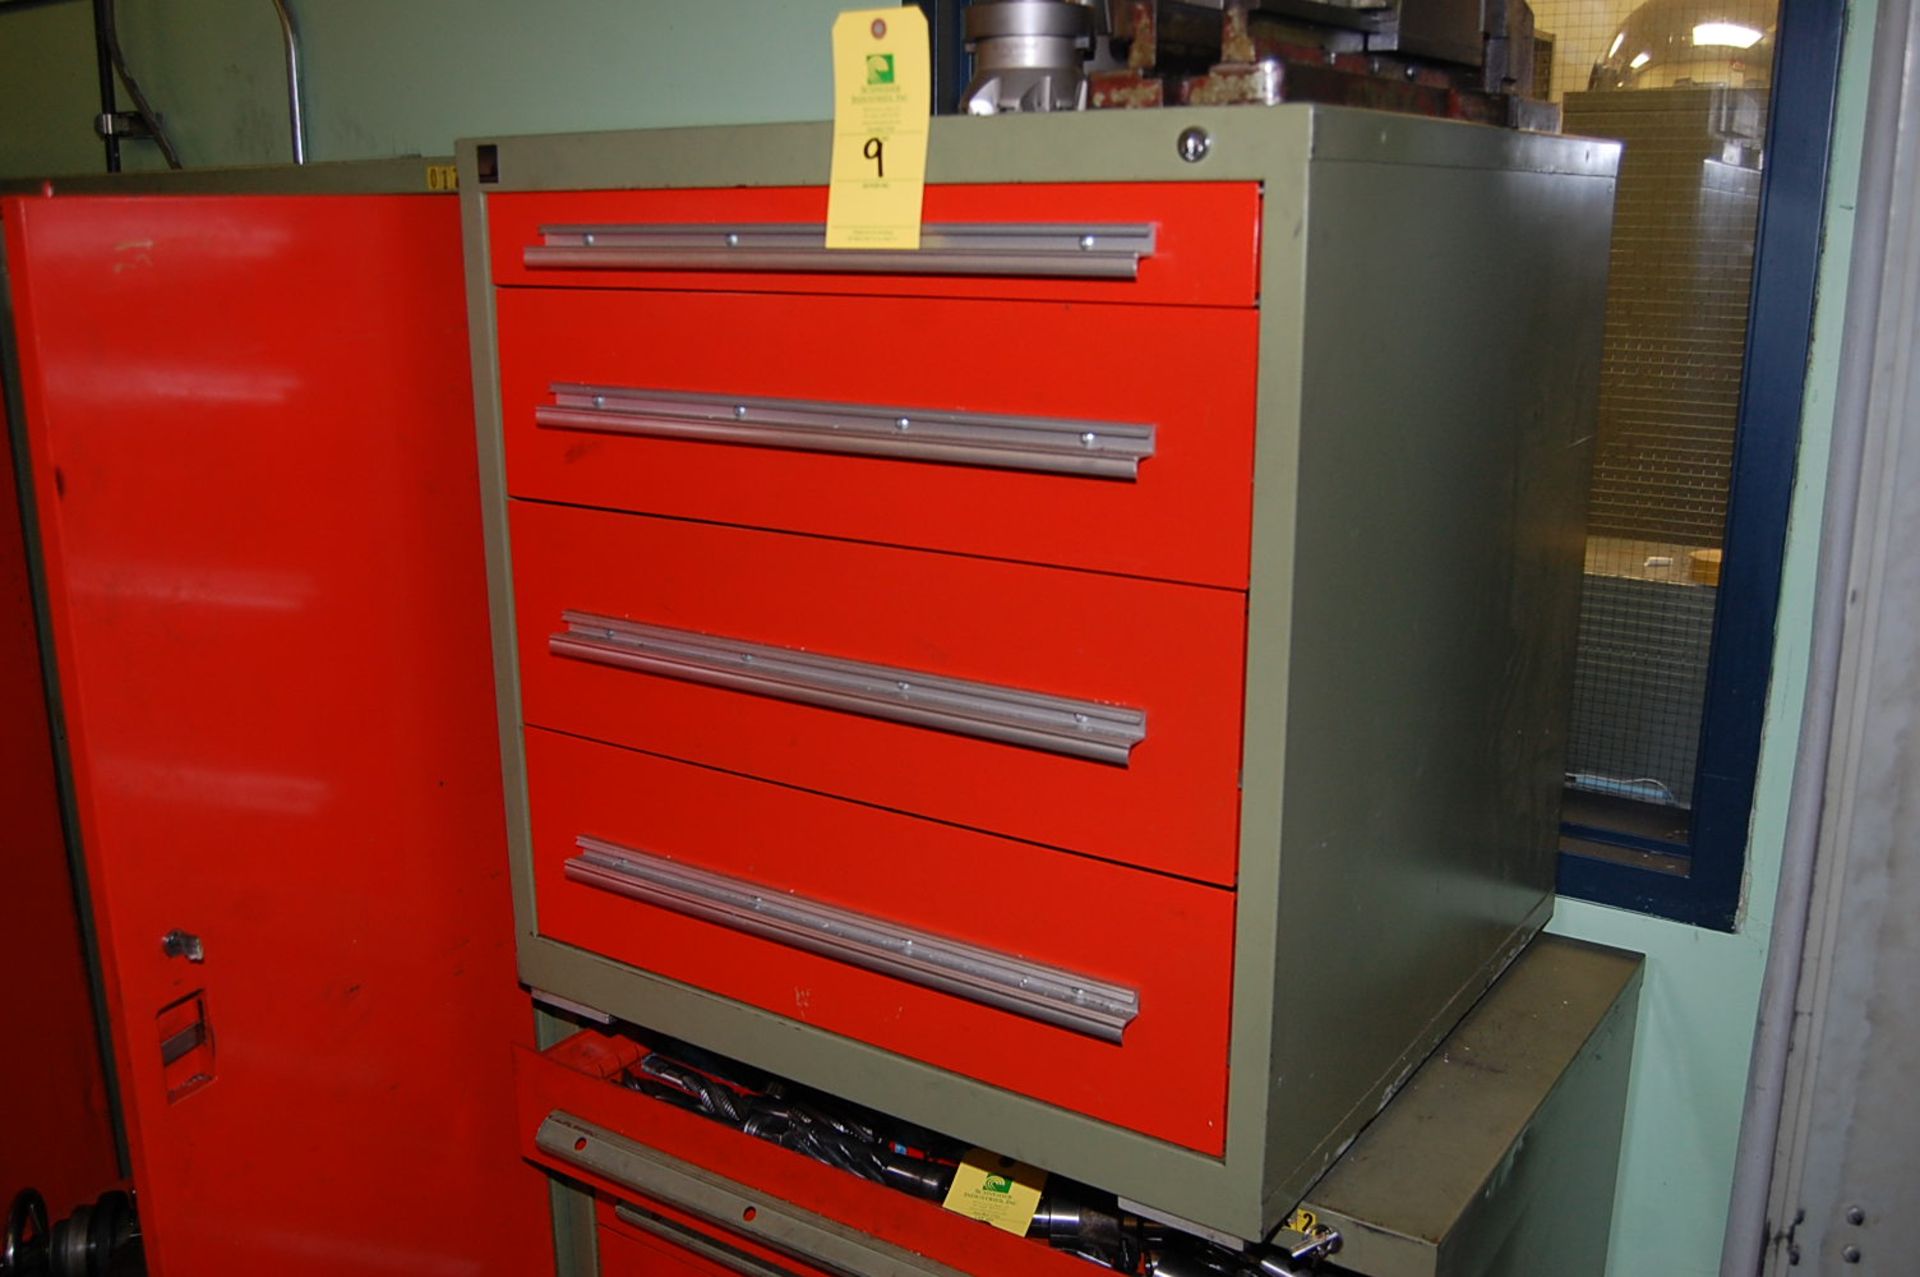 Rousseau 4-Drawer/Roller Drawer Tool Cabinet, Includes Contents - Assorted Kenmetal and Niagara